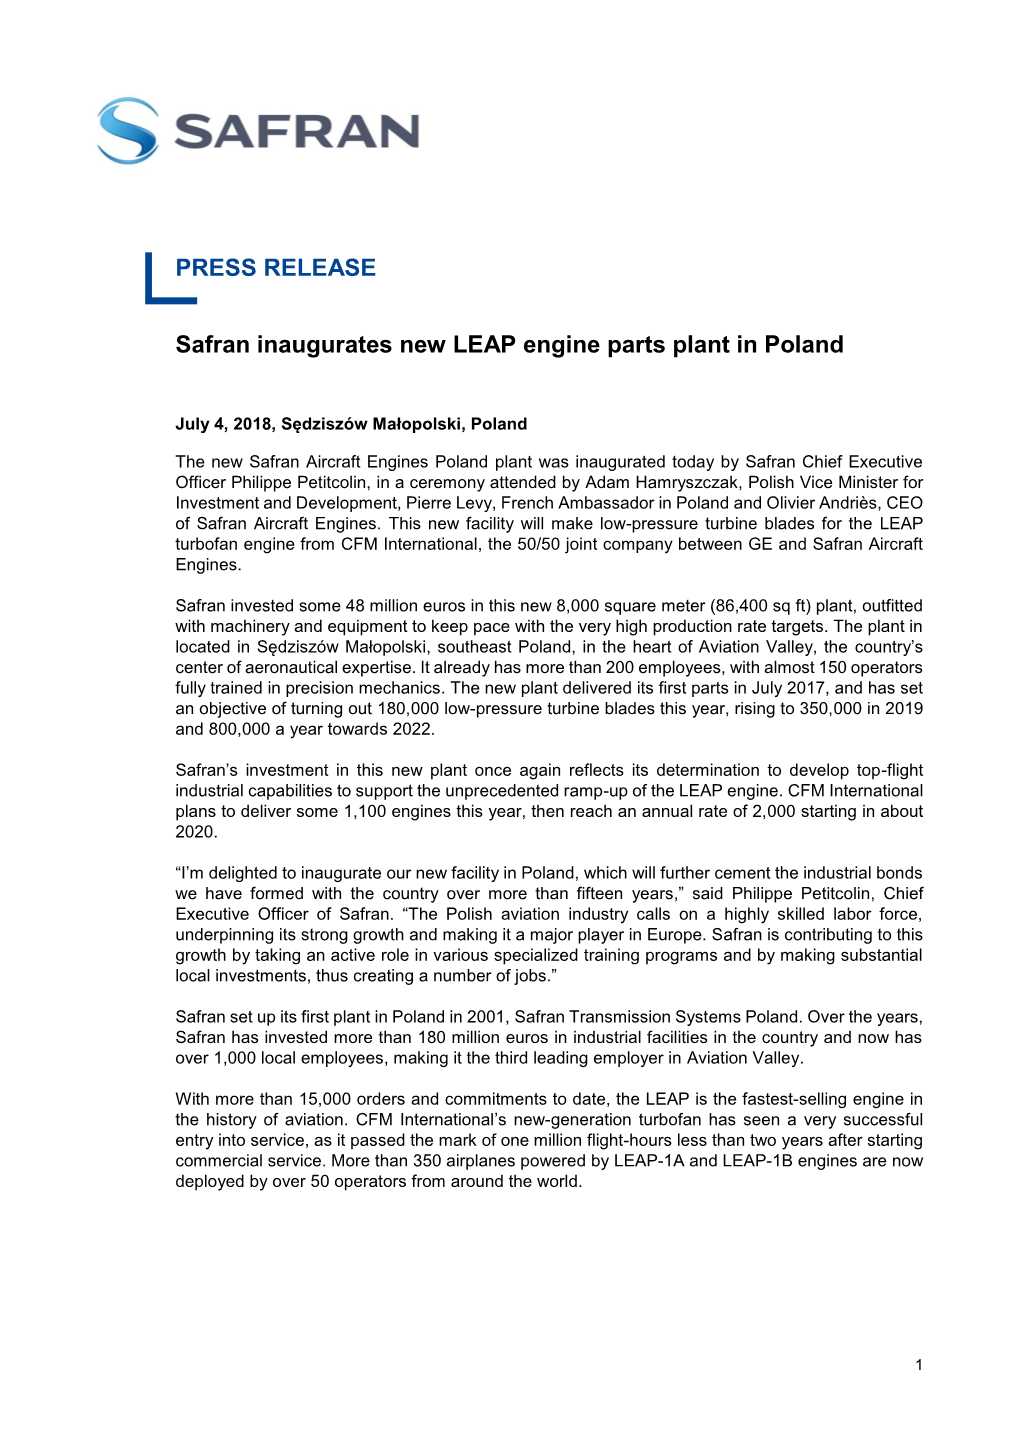 PRESS RELEASE Safran Inaugurates New LEAP Engine Parts Plant in Poland